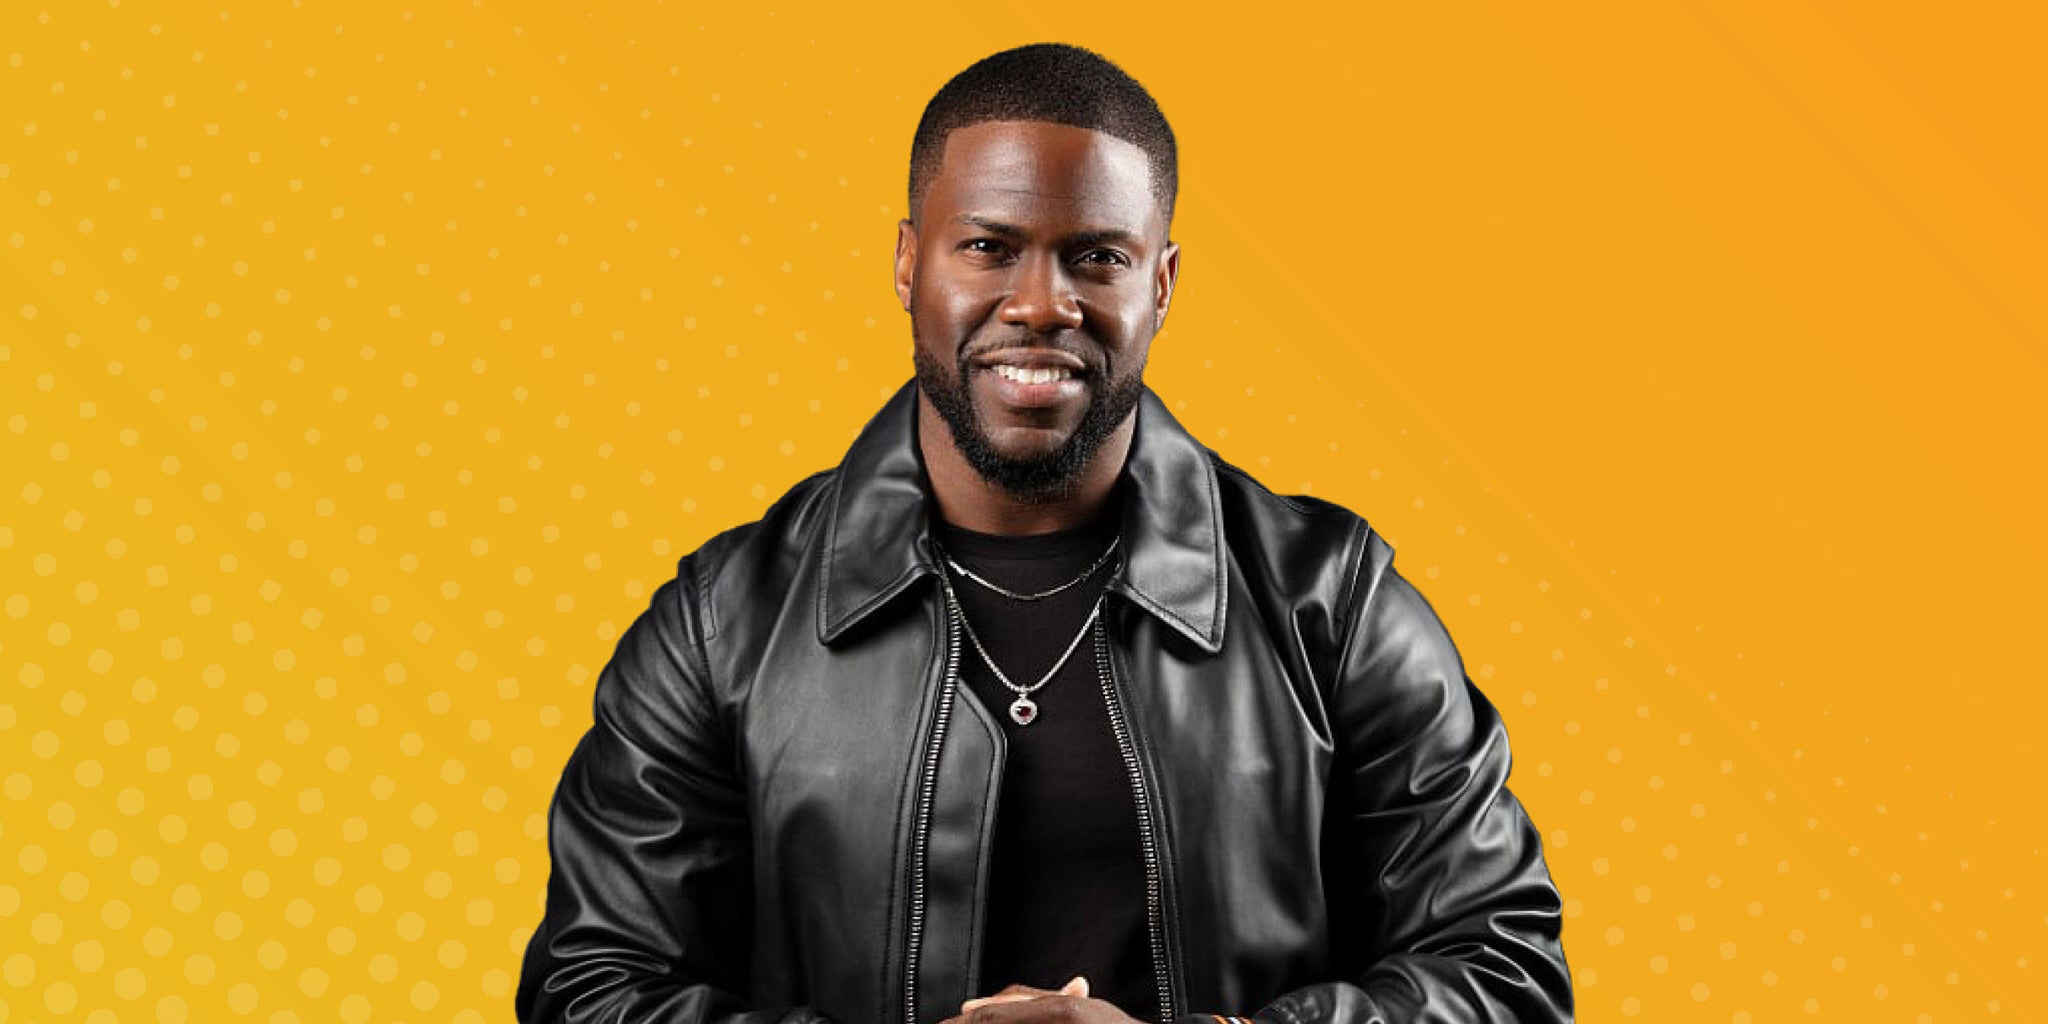 Who has Kevin Hart dated? Girlfriend List, Dating History